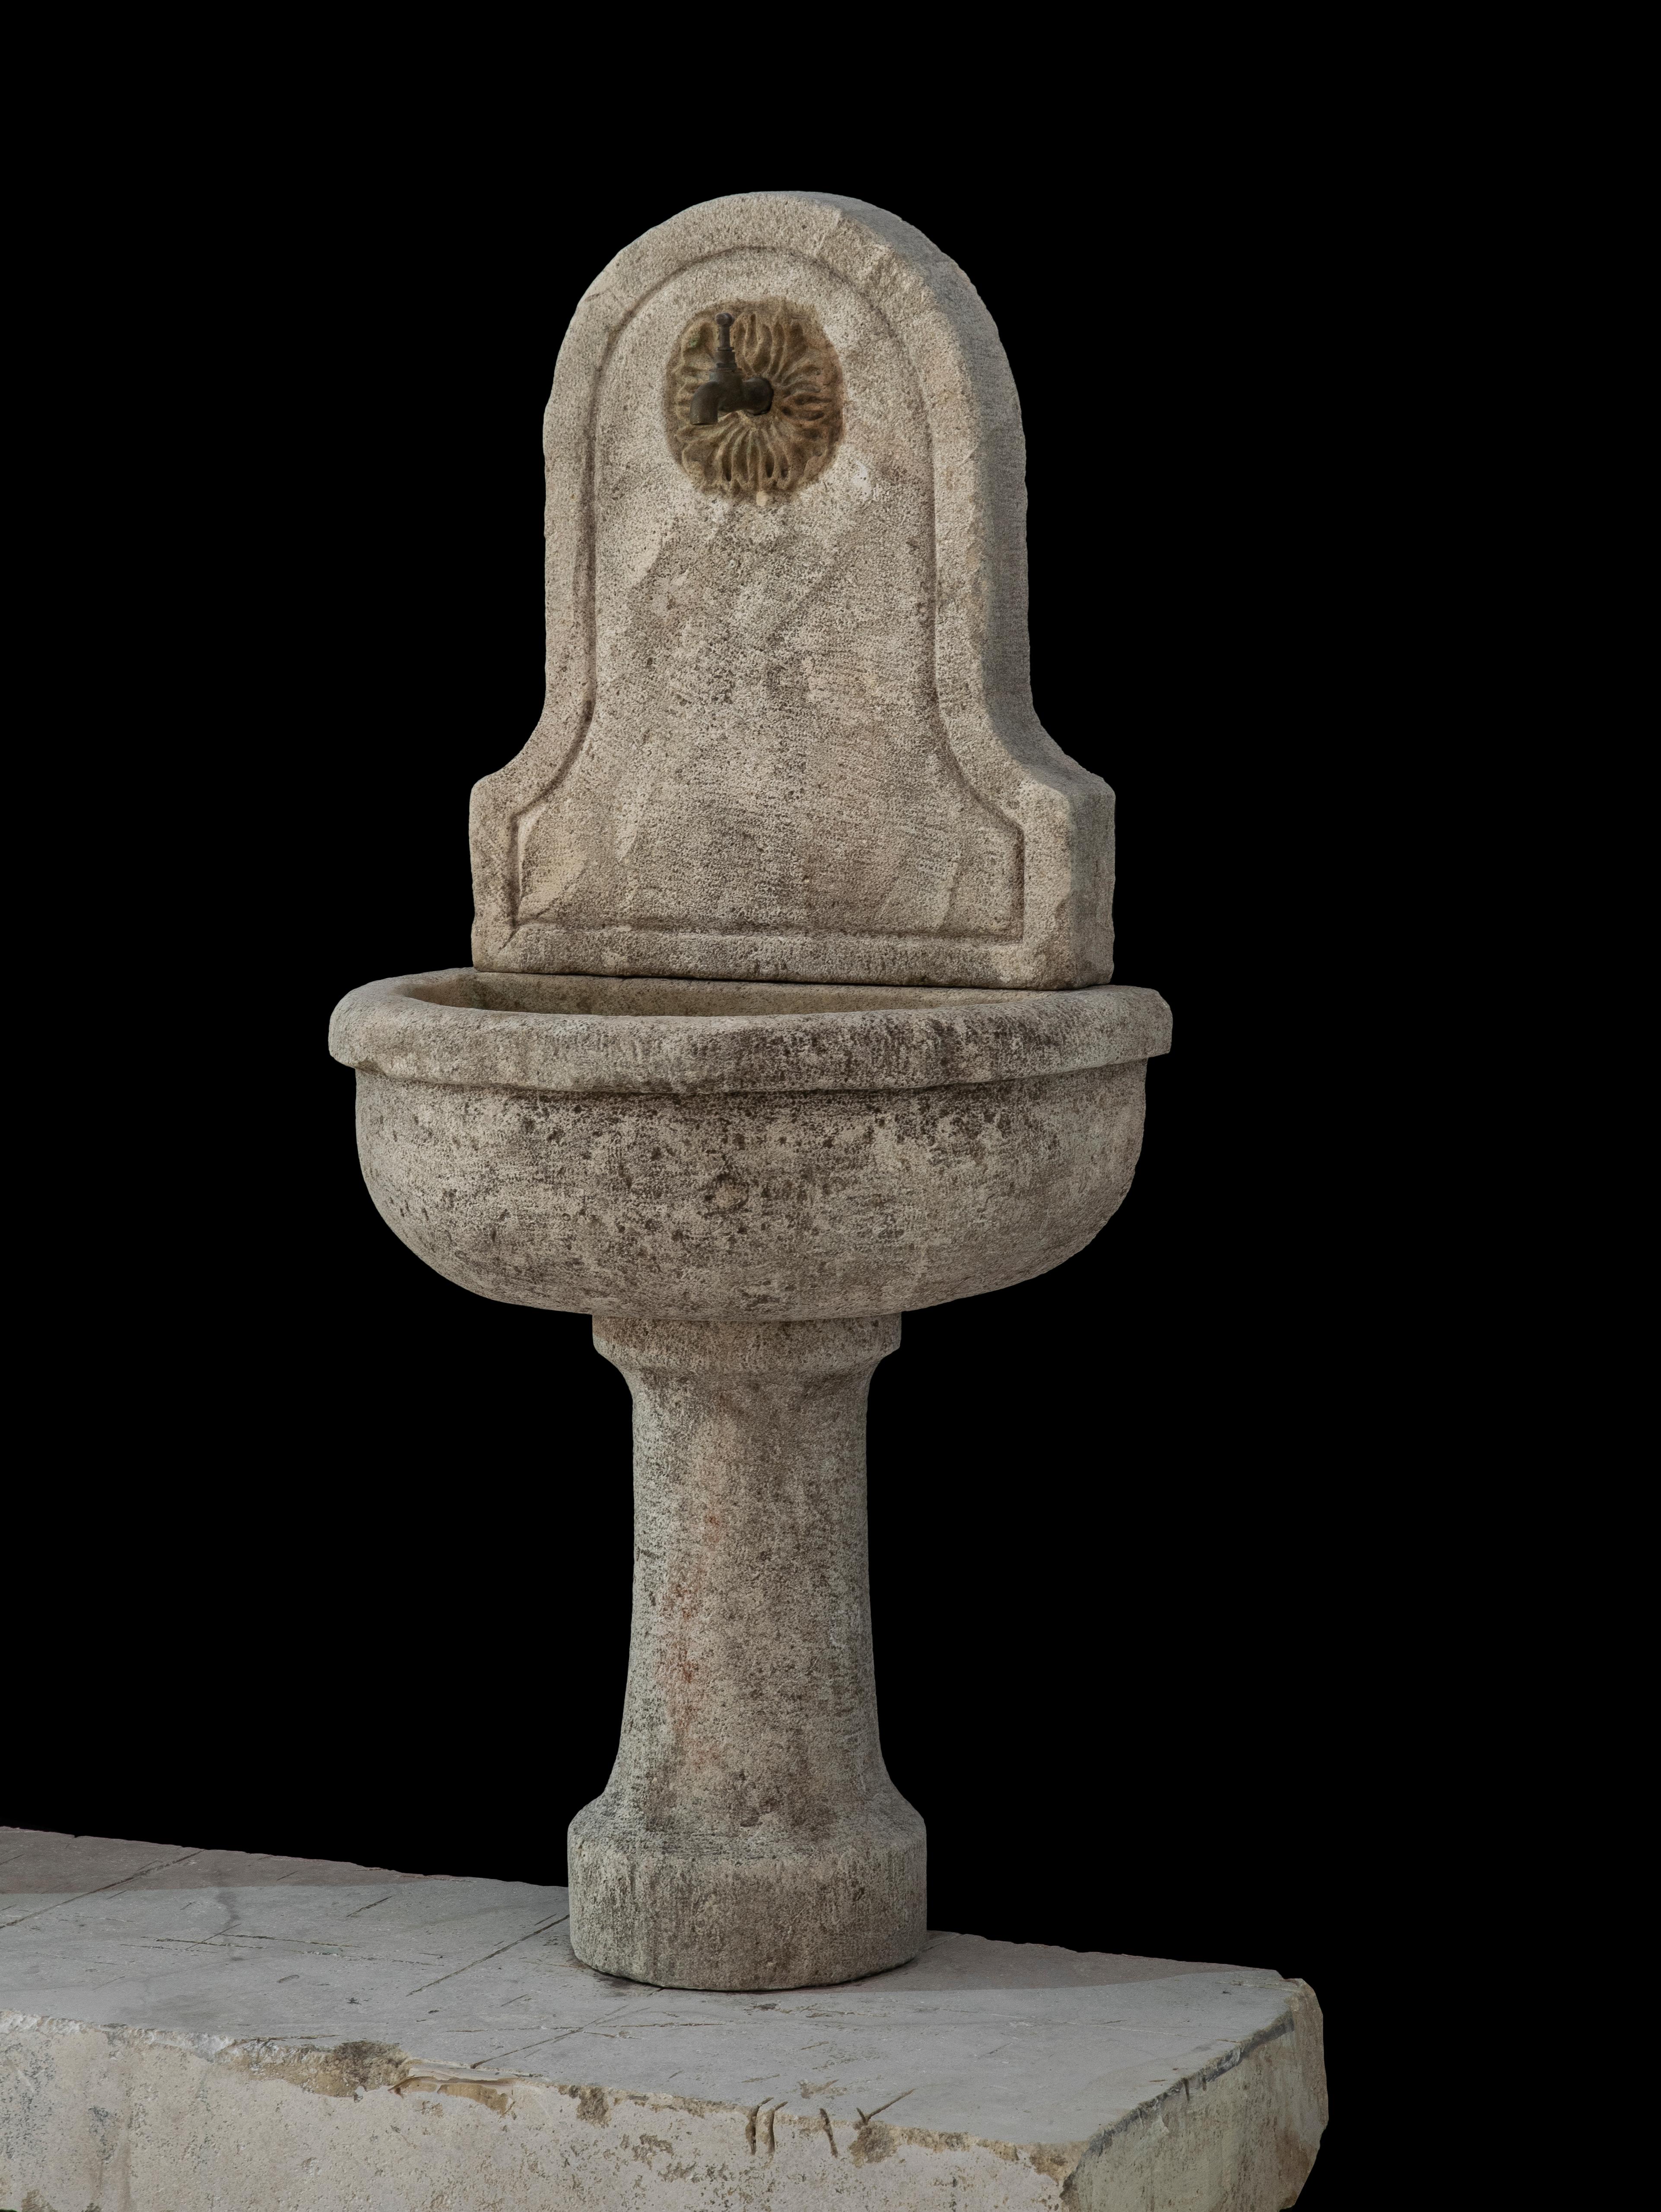 This beautiful antique 19th century limestone wall fountain is a great addition to any Mediterranean, Tuscan, rustic, or other custom style home. The naturally aged color and distressed patina for this old reclaimed hand-carved French fountain adds